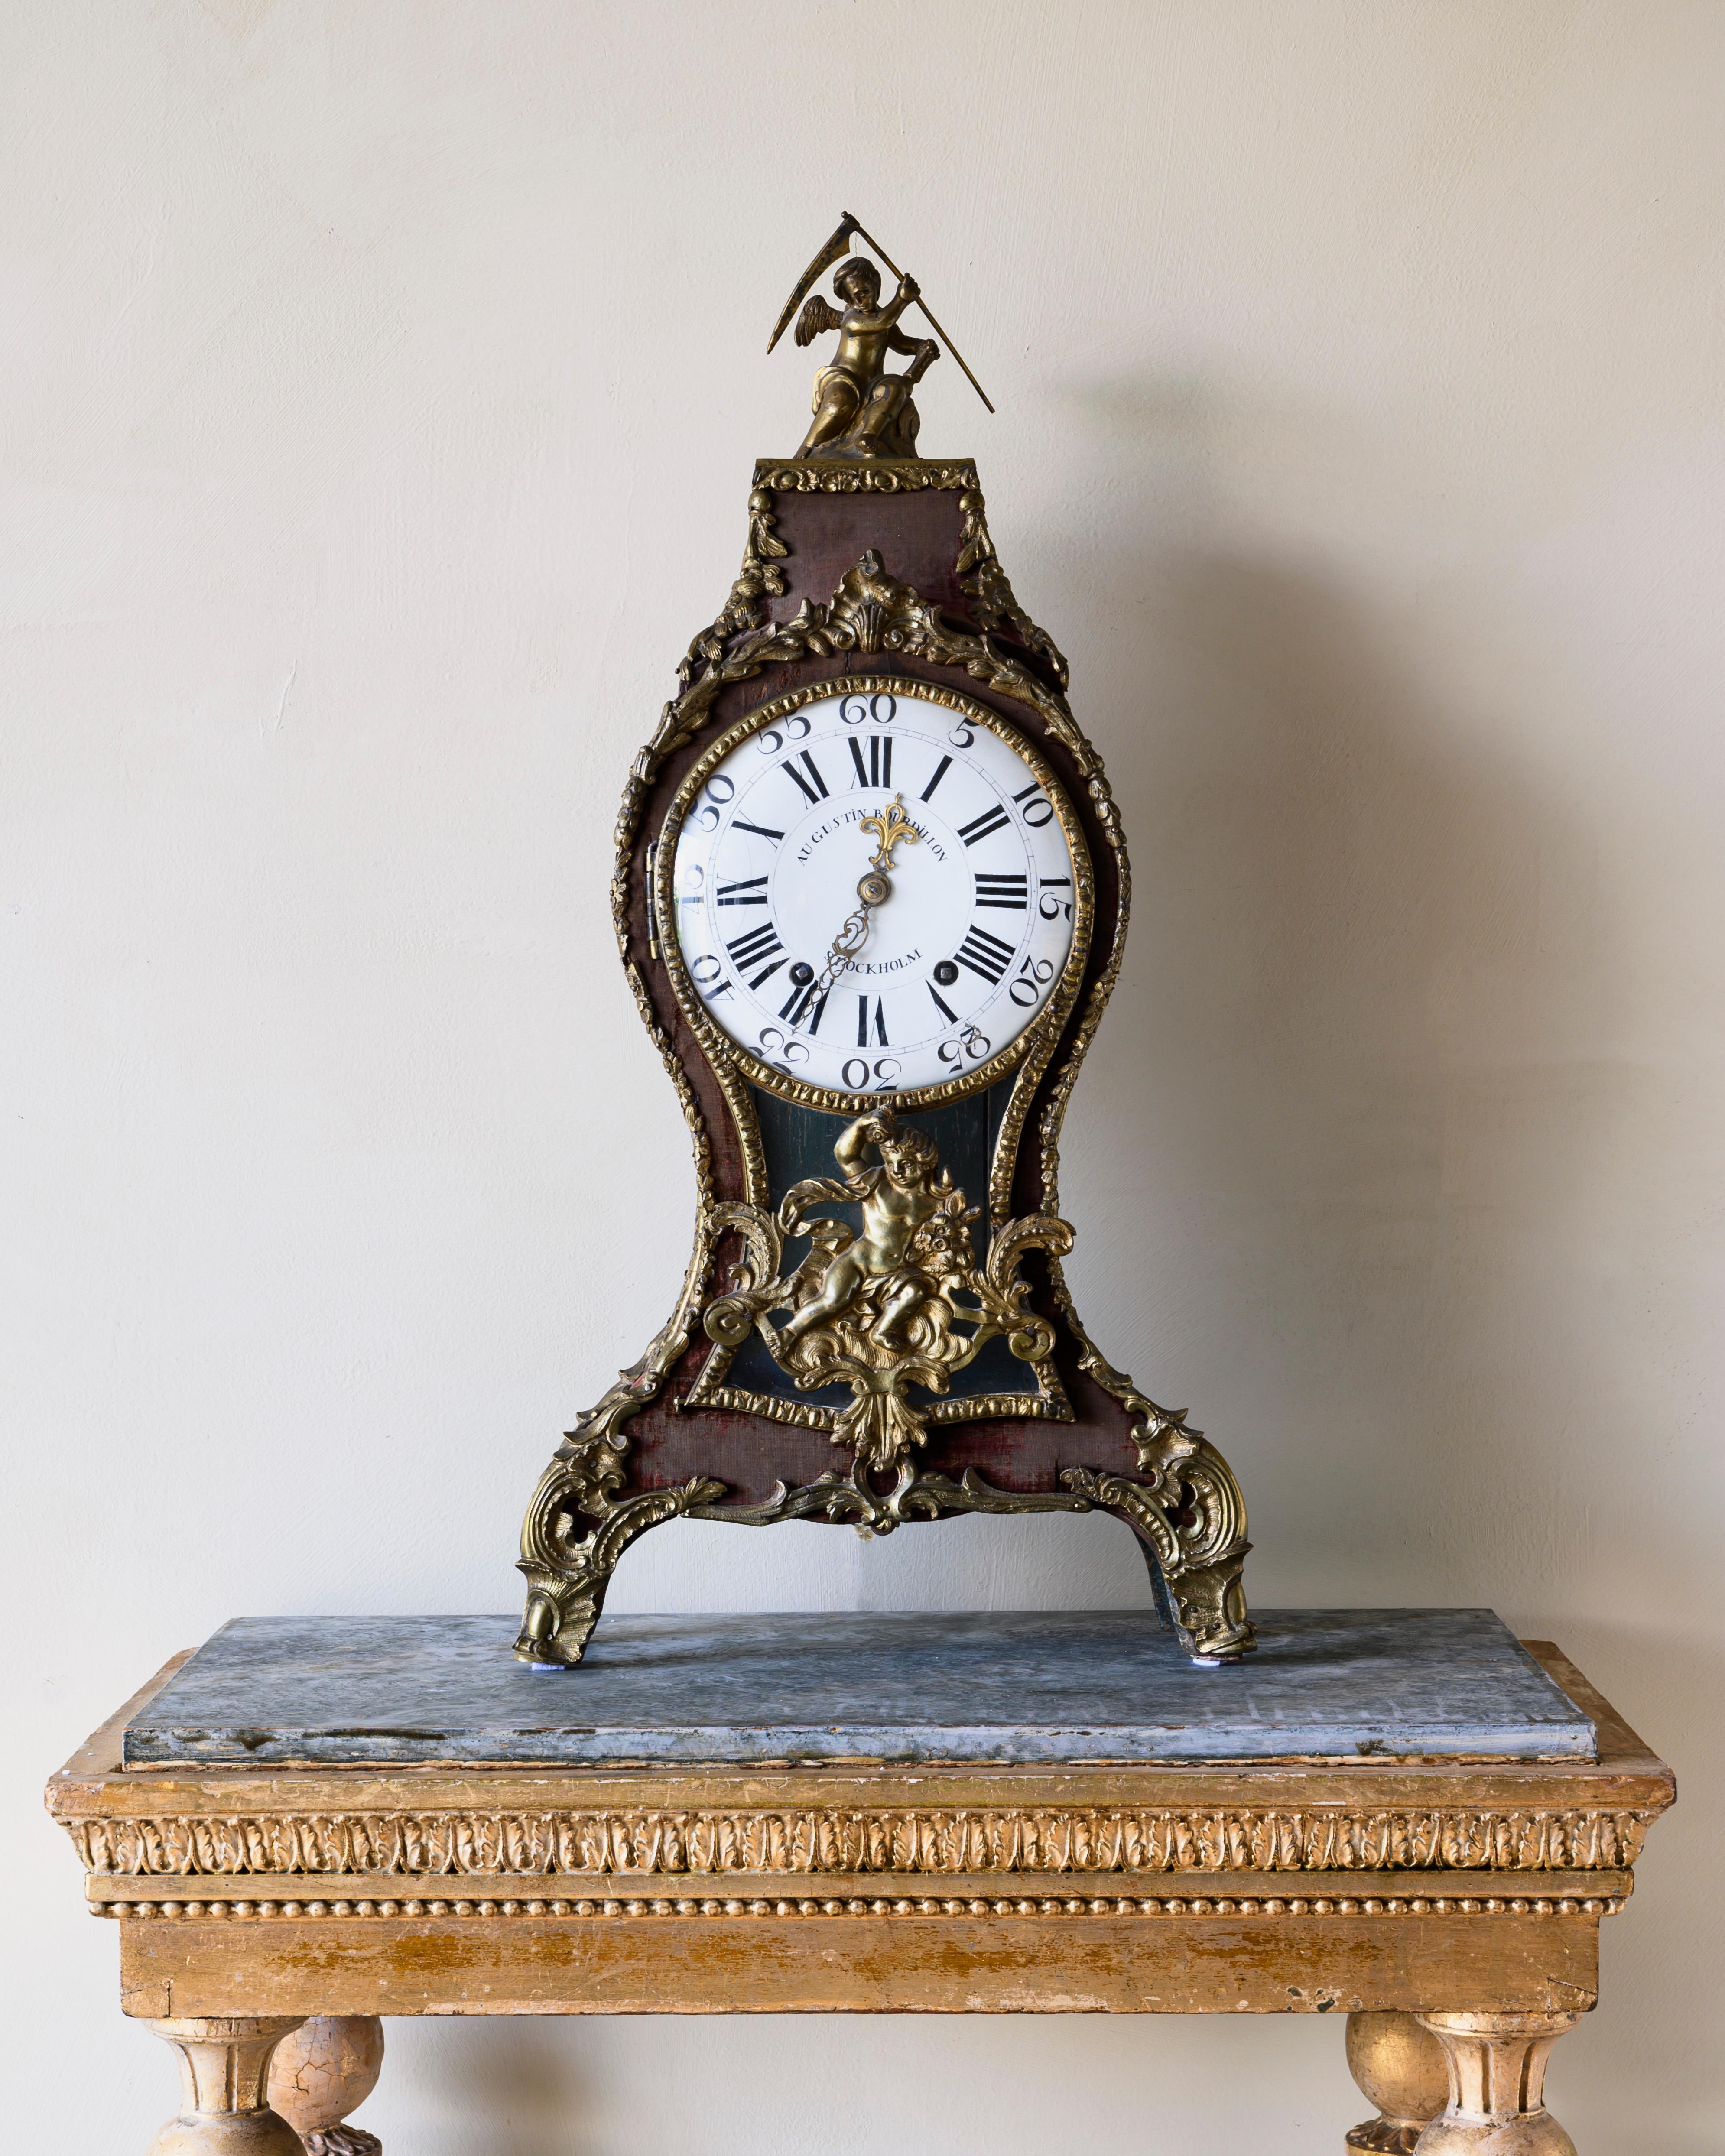 A fine Swedish 18th century rococo ringtone table clock with gilt bronze signed by Augustin Bourdillon. Covered in the original velvet with great patination. The interior of the case is painted with a chessboard pattern, Ca 1761-1770, Stockholm.